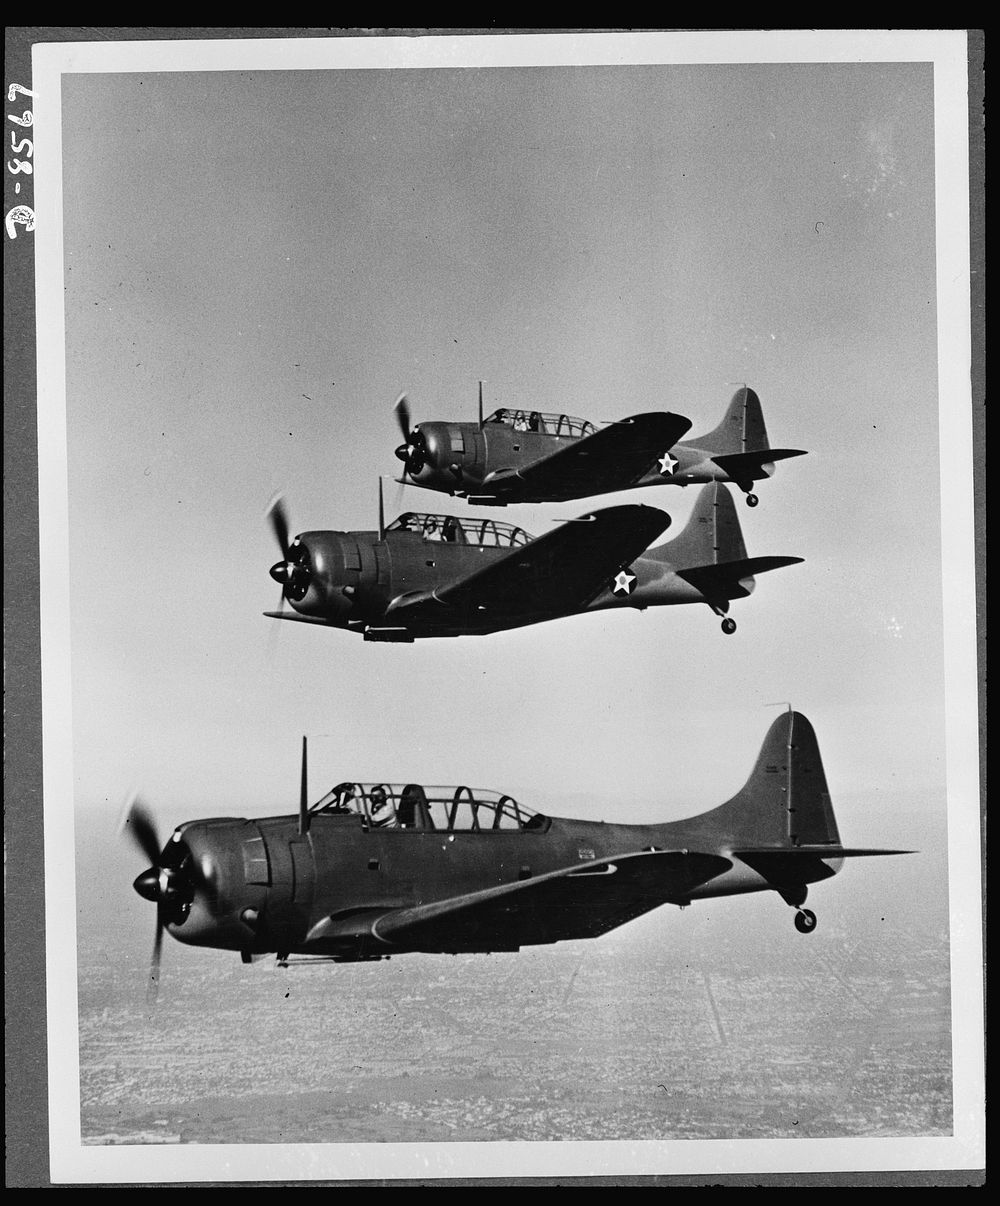 The Douglas A-24 (Dauntless) light dive bomber, is the Army counterpart of the Navy SBD, with certain modifications to meet…